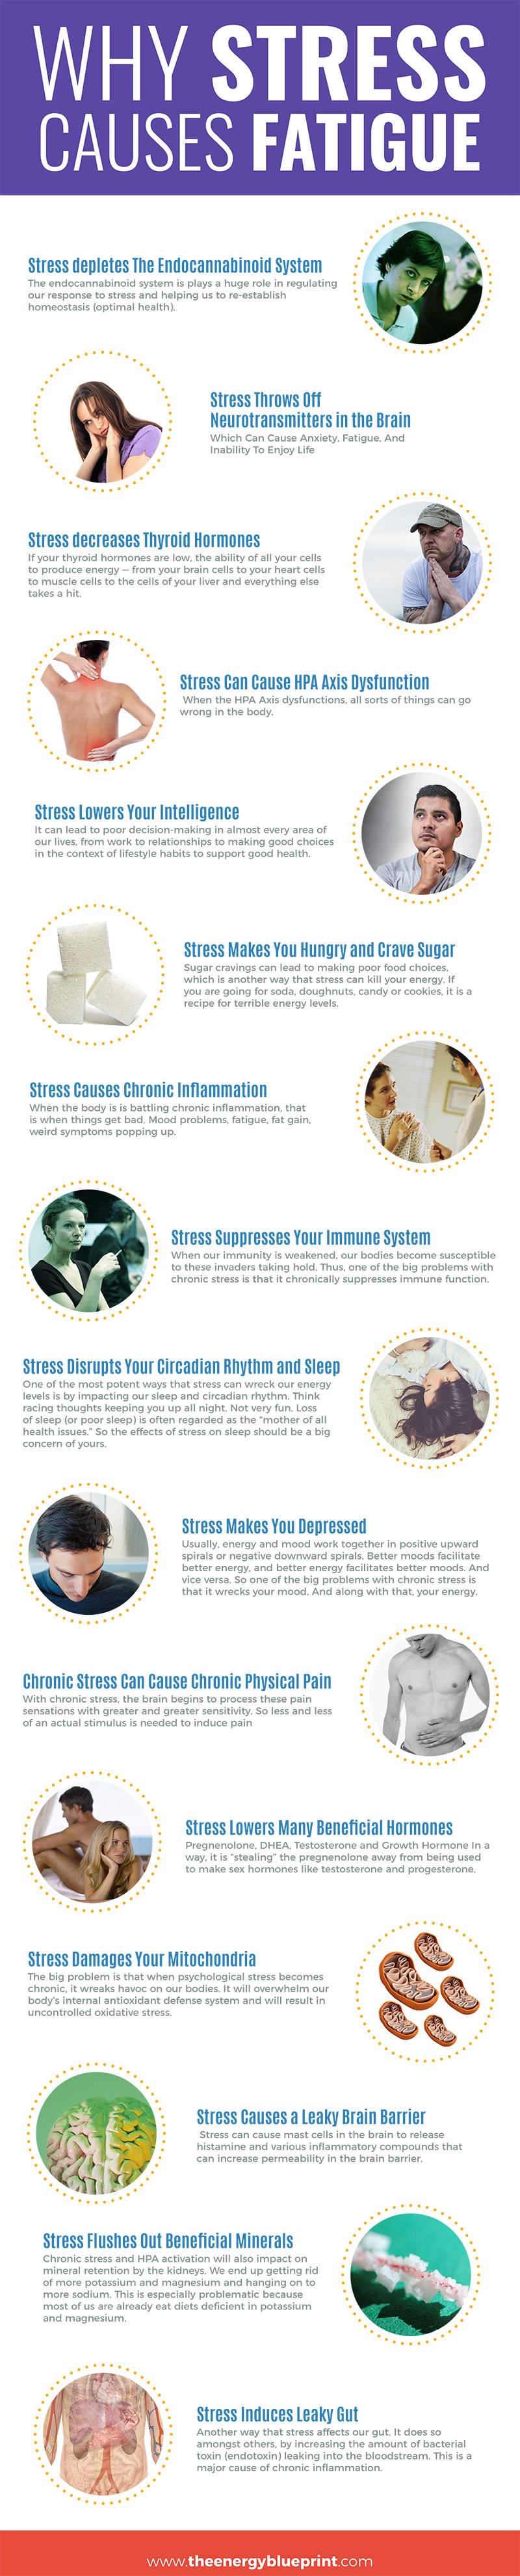 │Why Stress Causes Fatigue And How To Overcome Stress, www.theenergyblueprint.com